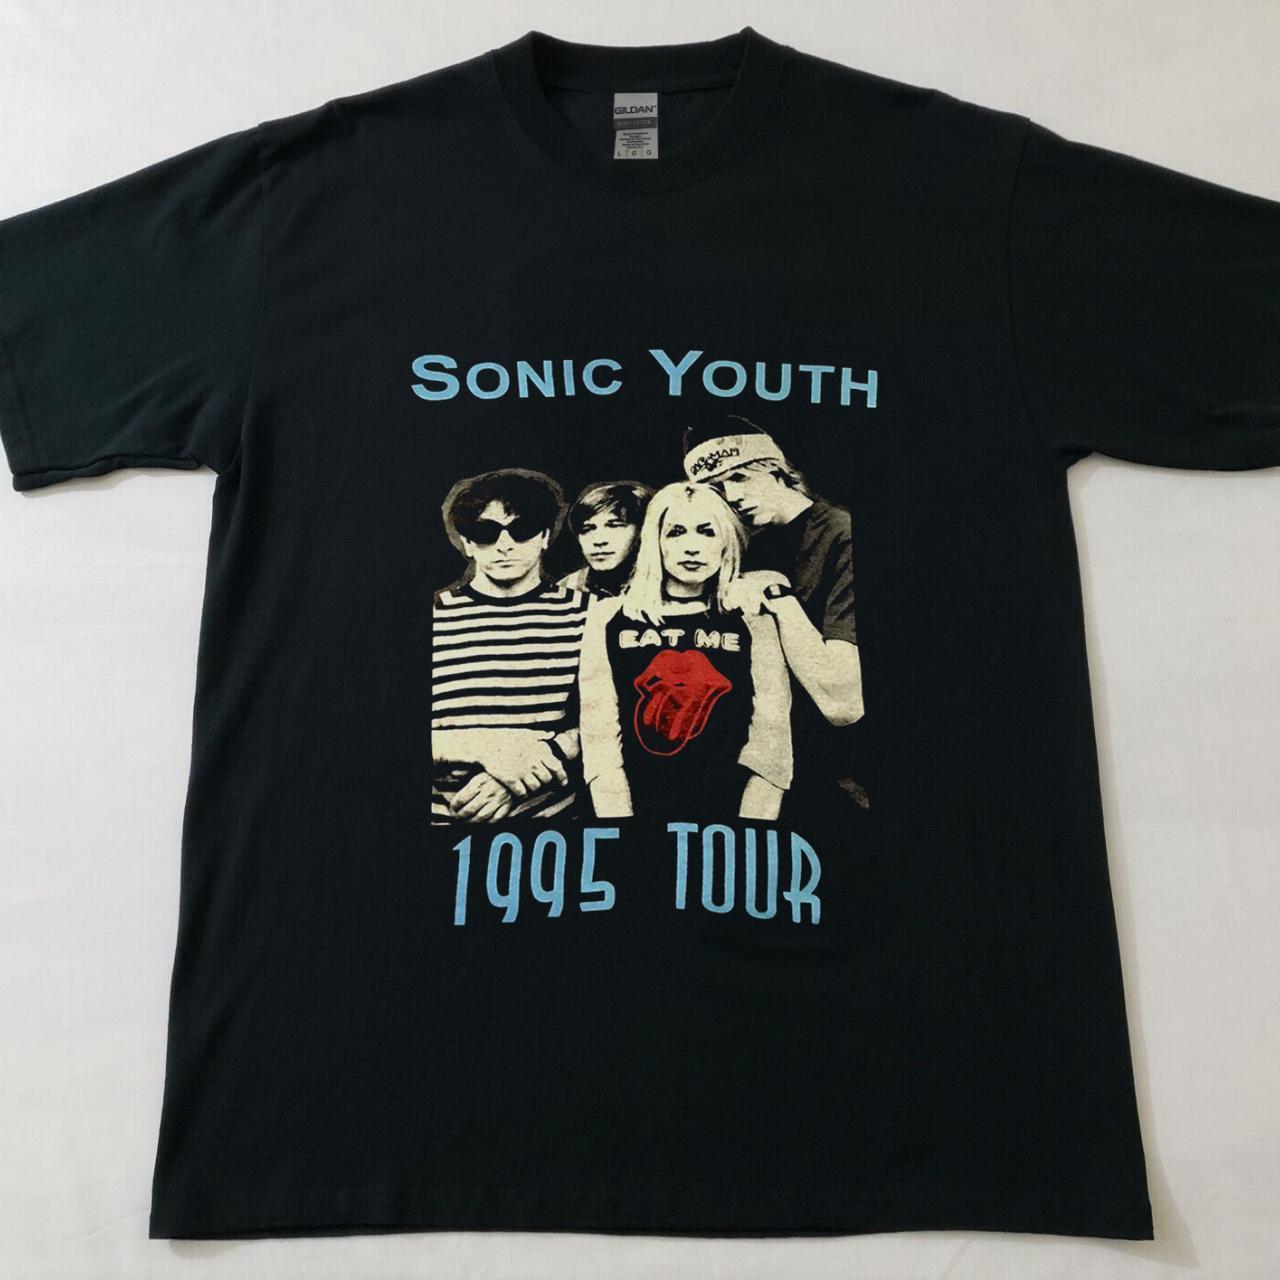 Sonic youth Tour T shirt, New Heavy Cotton, Pit to pit...